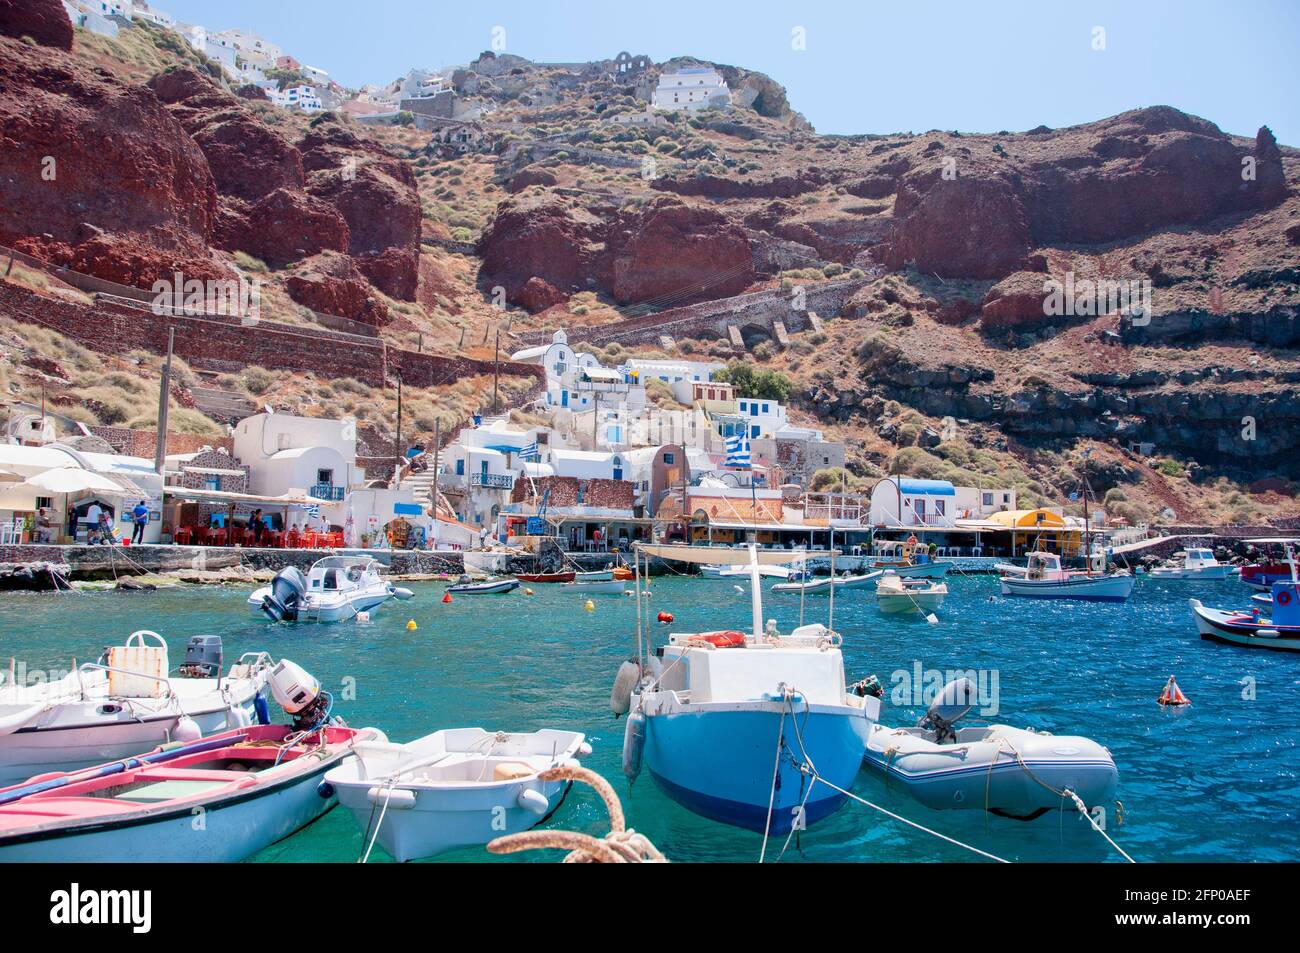 Amoudi harbor is located in the bay of the island of Santorini, Greece. The marina is nestled in the high volcanic cliffs with restaurants, bars Stock Photo